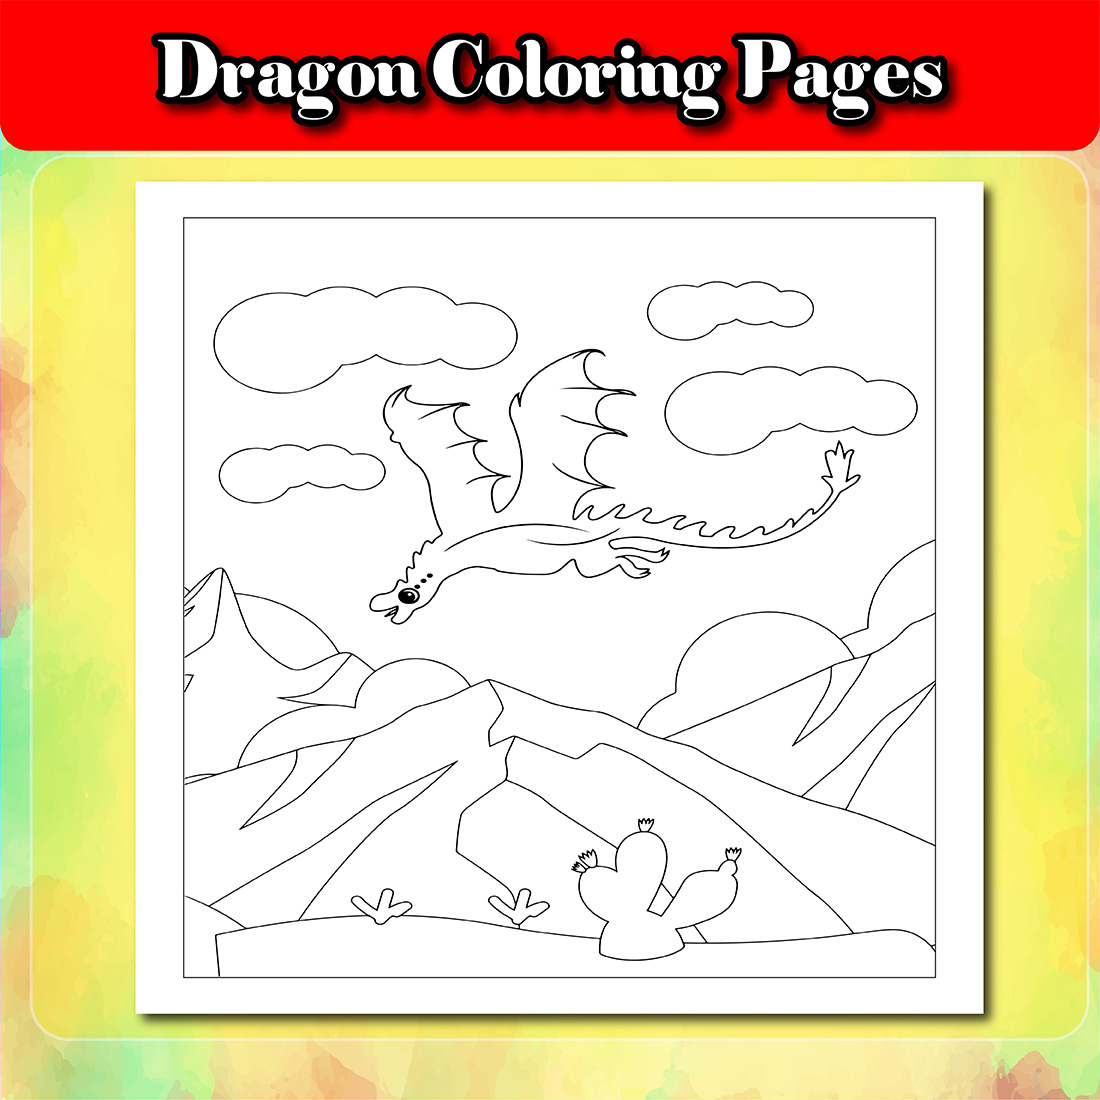 Dragon Coloring Pages cover image.